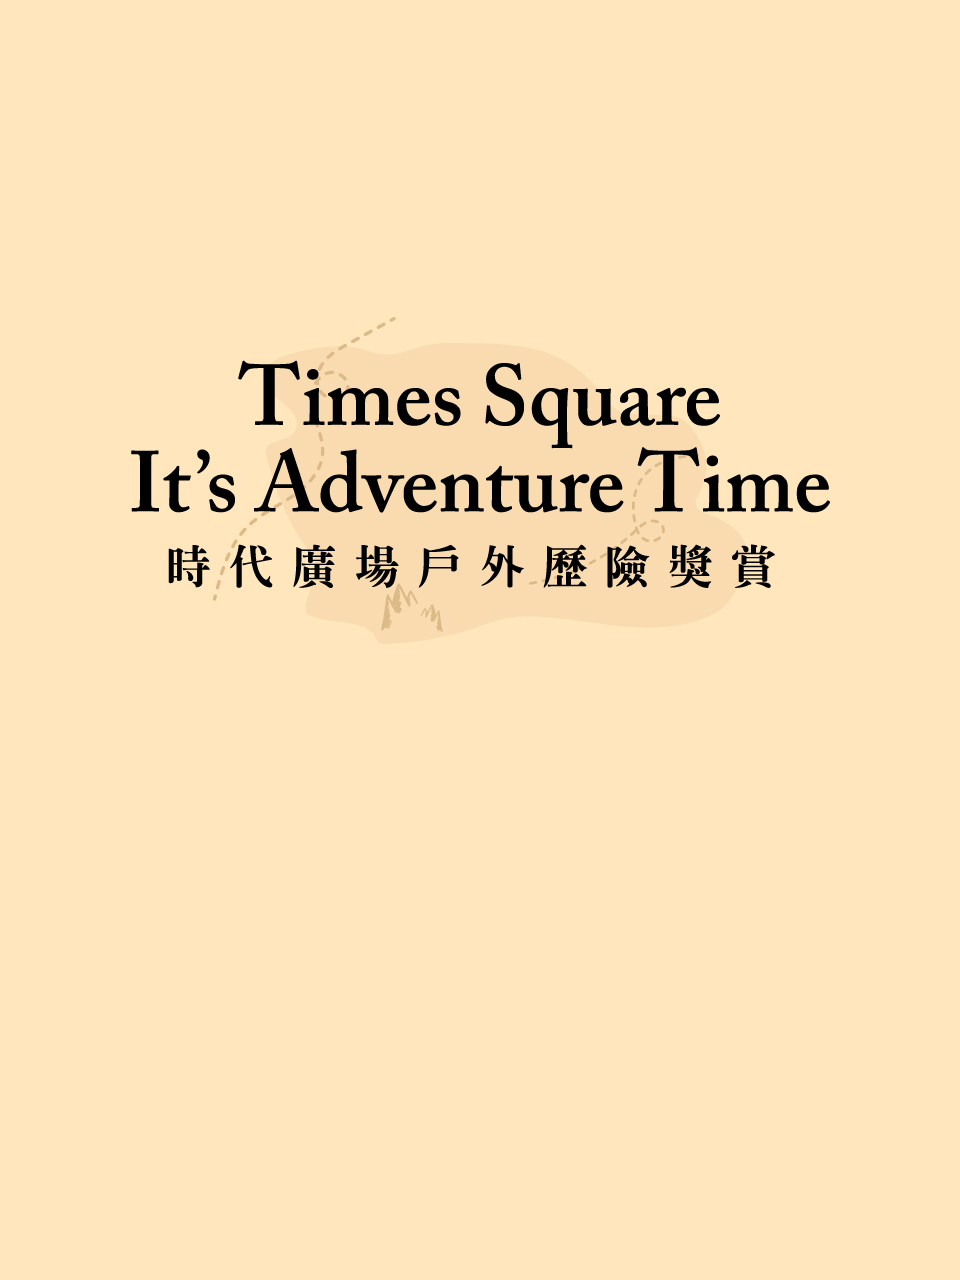 Times Square - It’s Adventure Time